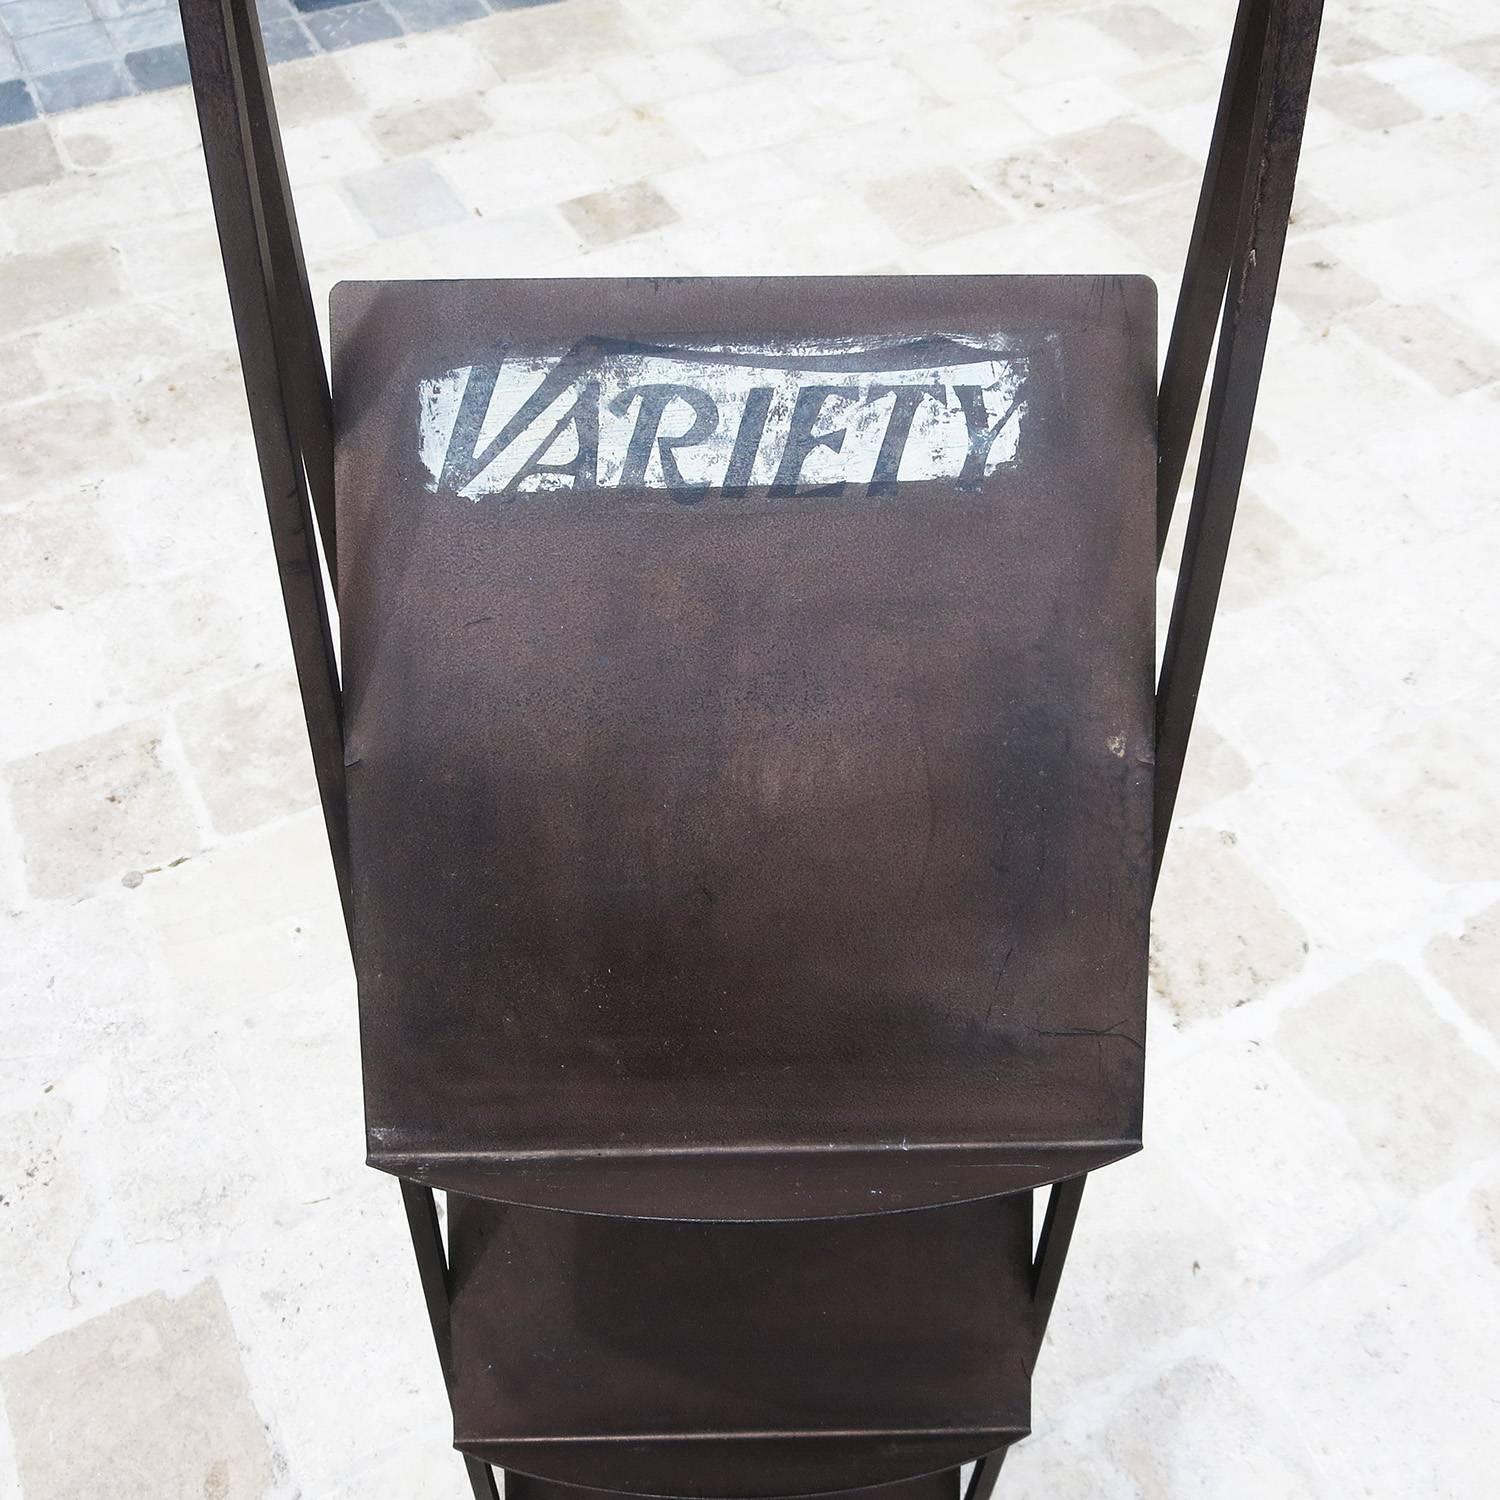 Variety magazine, founded in 1905, was the main conduit for all information on the film trade in Hollywood. This iron stand was provided by Variety to the Ambassador Hotel (1921-2005) in Los Angeles. The Ambassador was the center of Hollywood